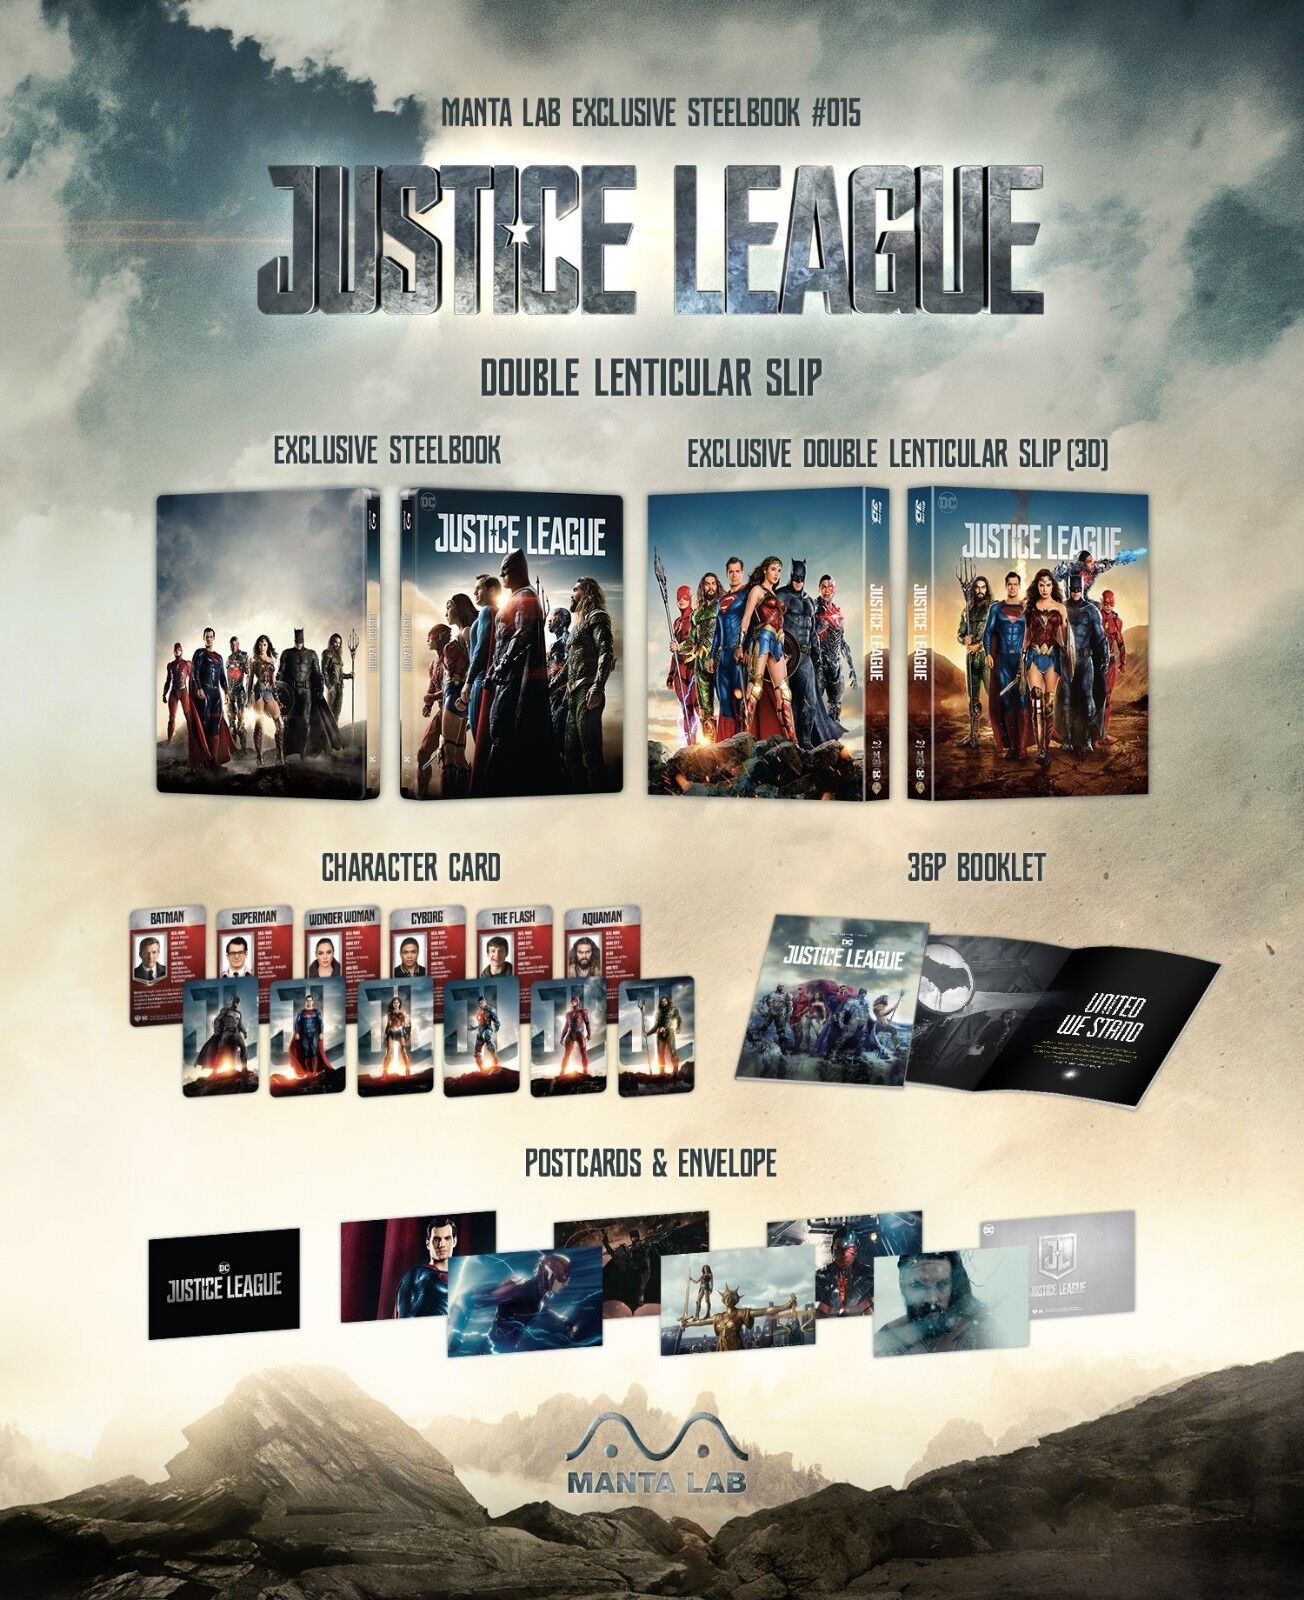 Justice League 4K+3D Blu-ray Steelbook Manta Lab Exclusive ME#15 One Click Box Set *LOW NUMBER*